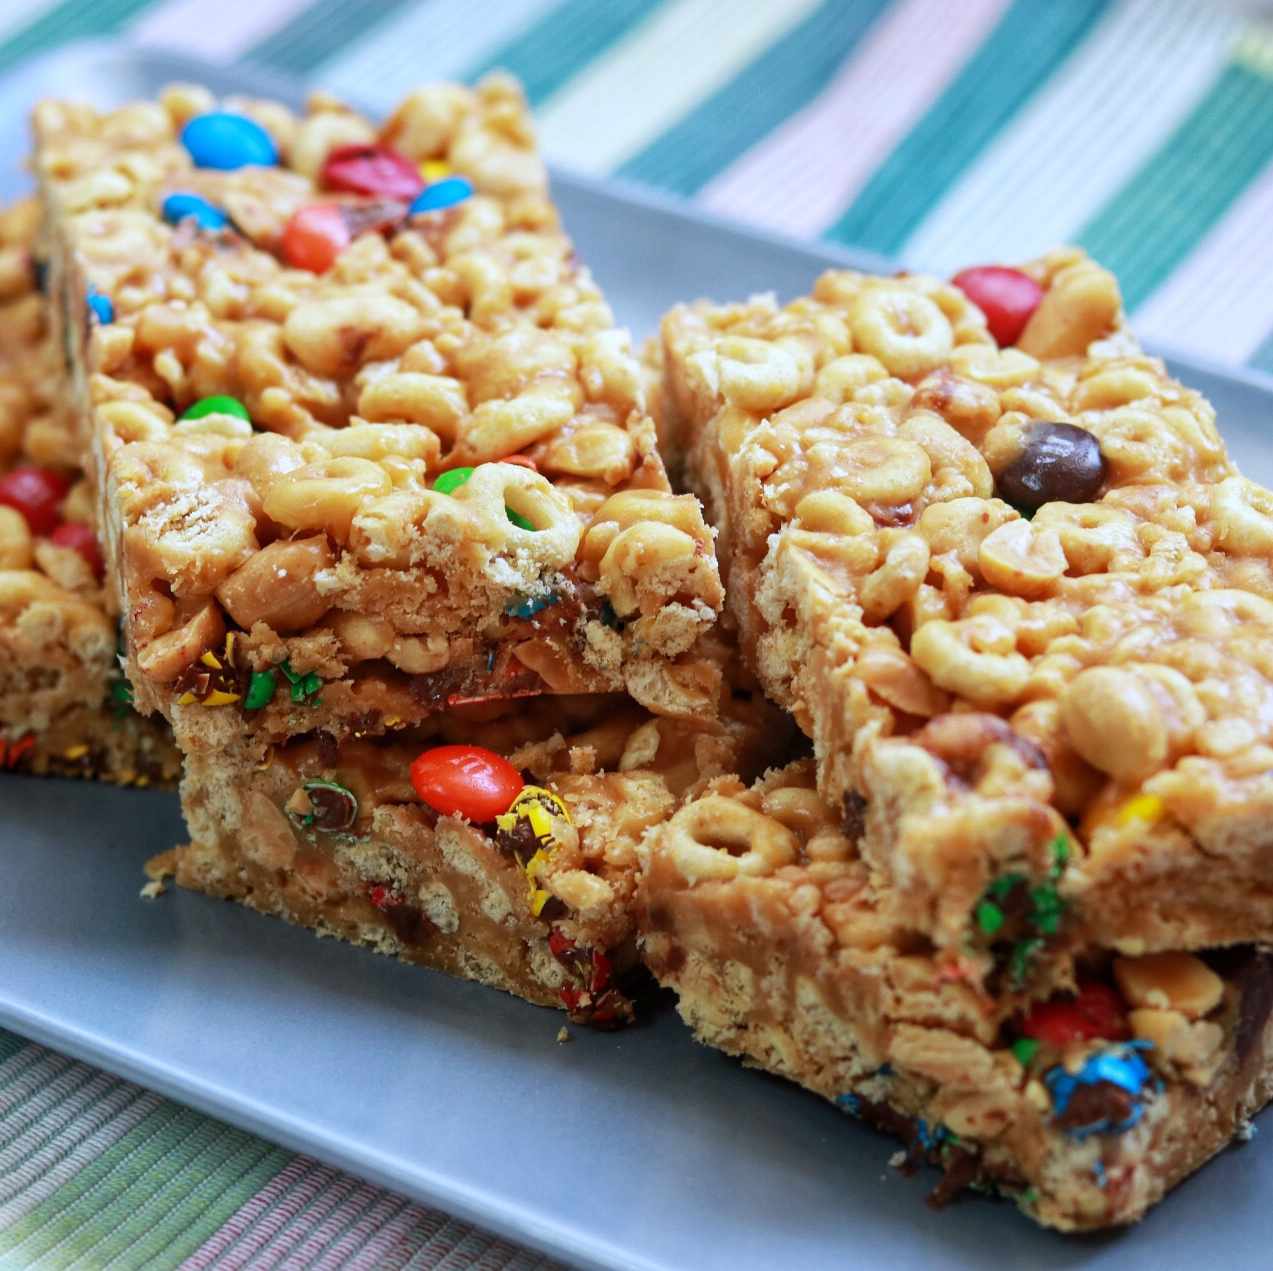 No Bake Cereal Bars with Cheerios, nuts, and M&Ms